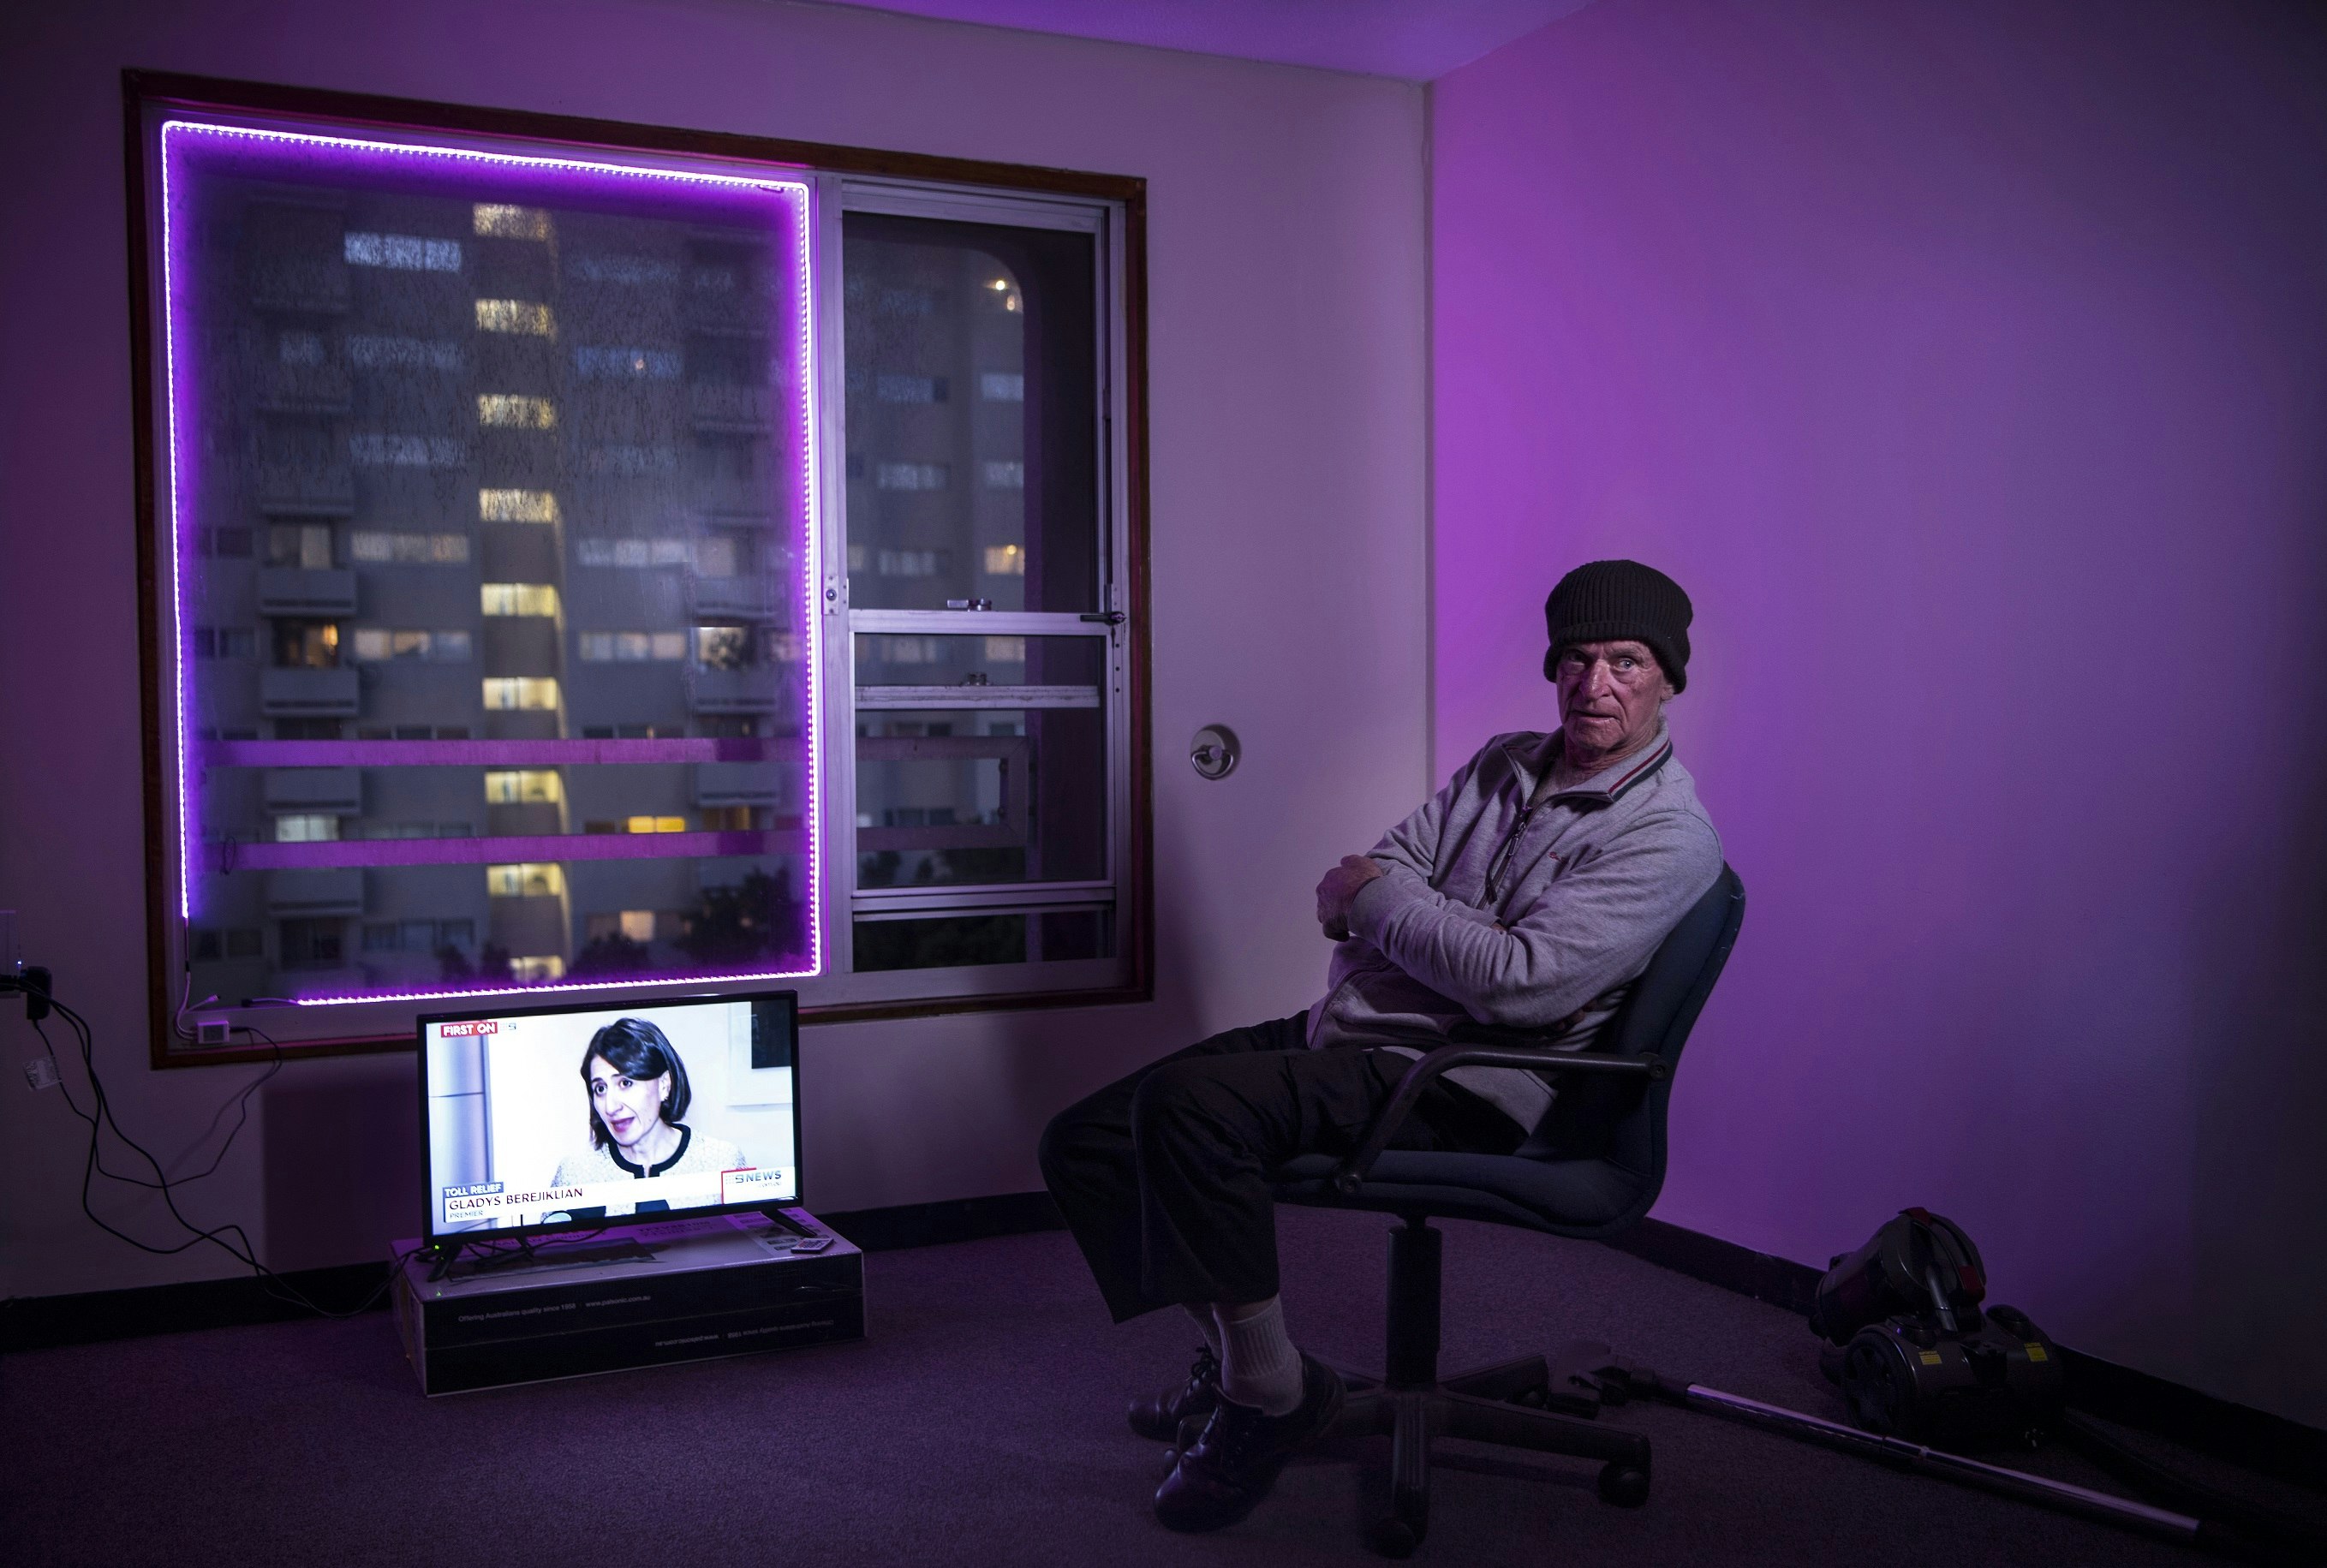 An elderly Caucasian man wearing a beanie and a grey sweater sits in a sparsely furnished room with purple fairylights fixed to the window frame. A television screen shows politician Gladys Berejiklian speaking at a press conference.